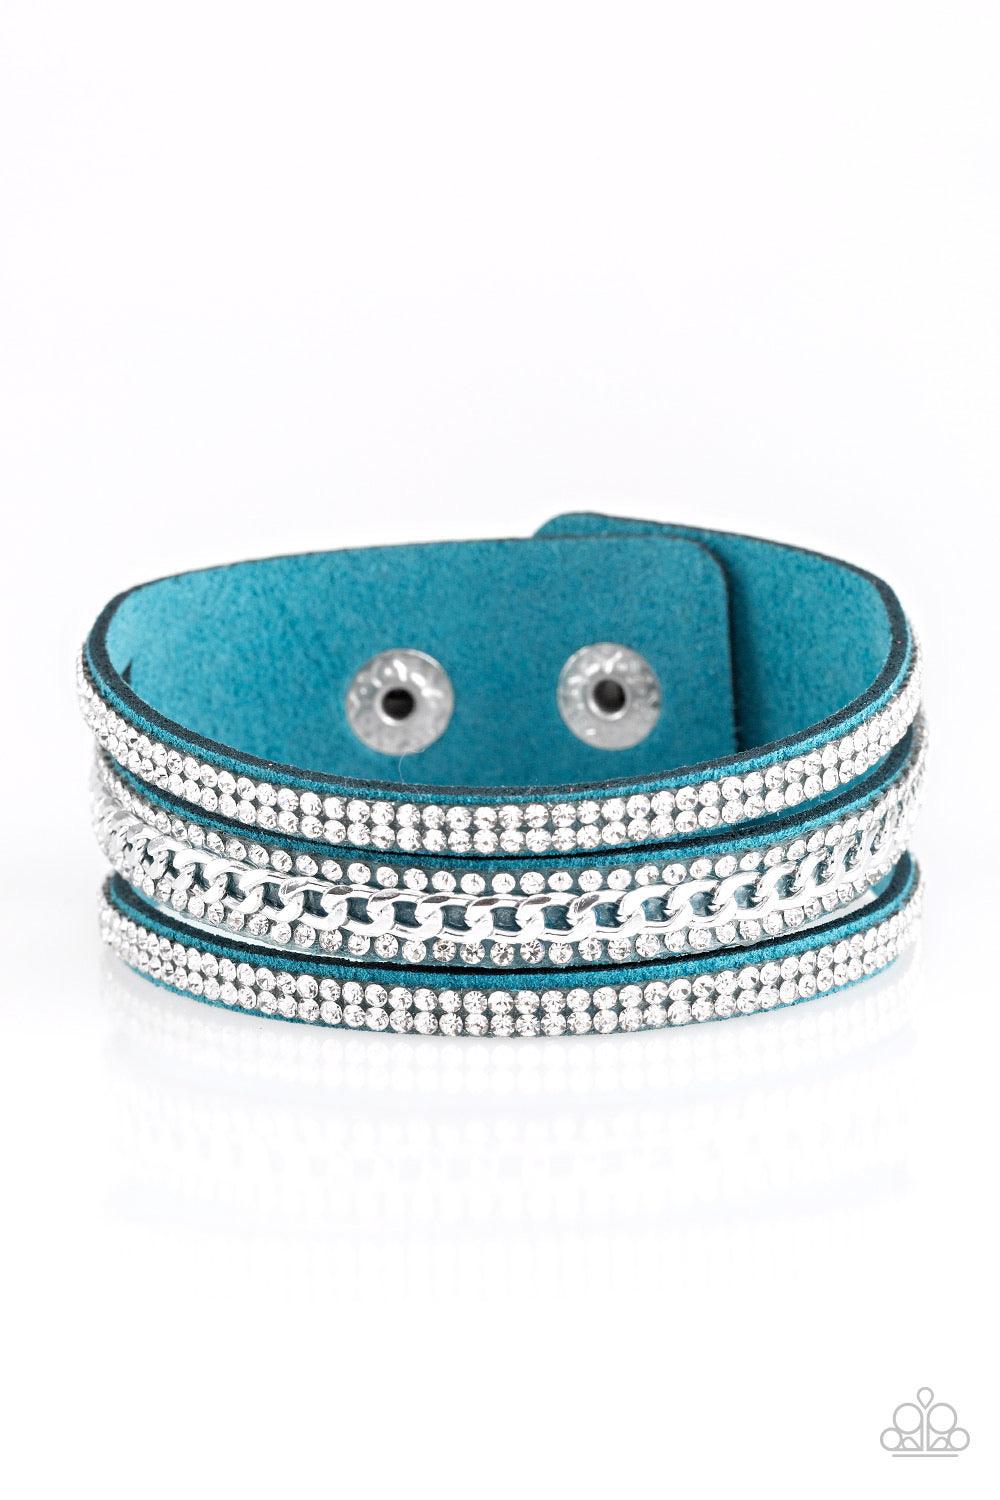 Paparazzi Accessories Rollin In Rhinestones - Blue Rows of glassy white rhinestones and a shimmery silver chain are encrusted along blue suede bands for a sassy look. Features an adjustable snap closure. Sold as one individual bracelet. Jewelry